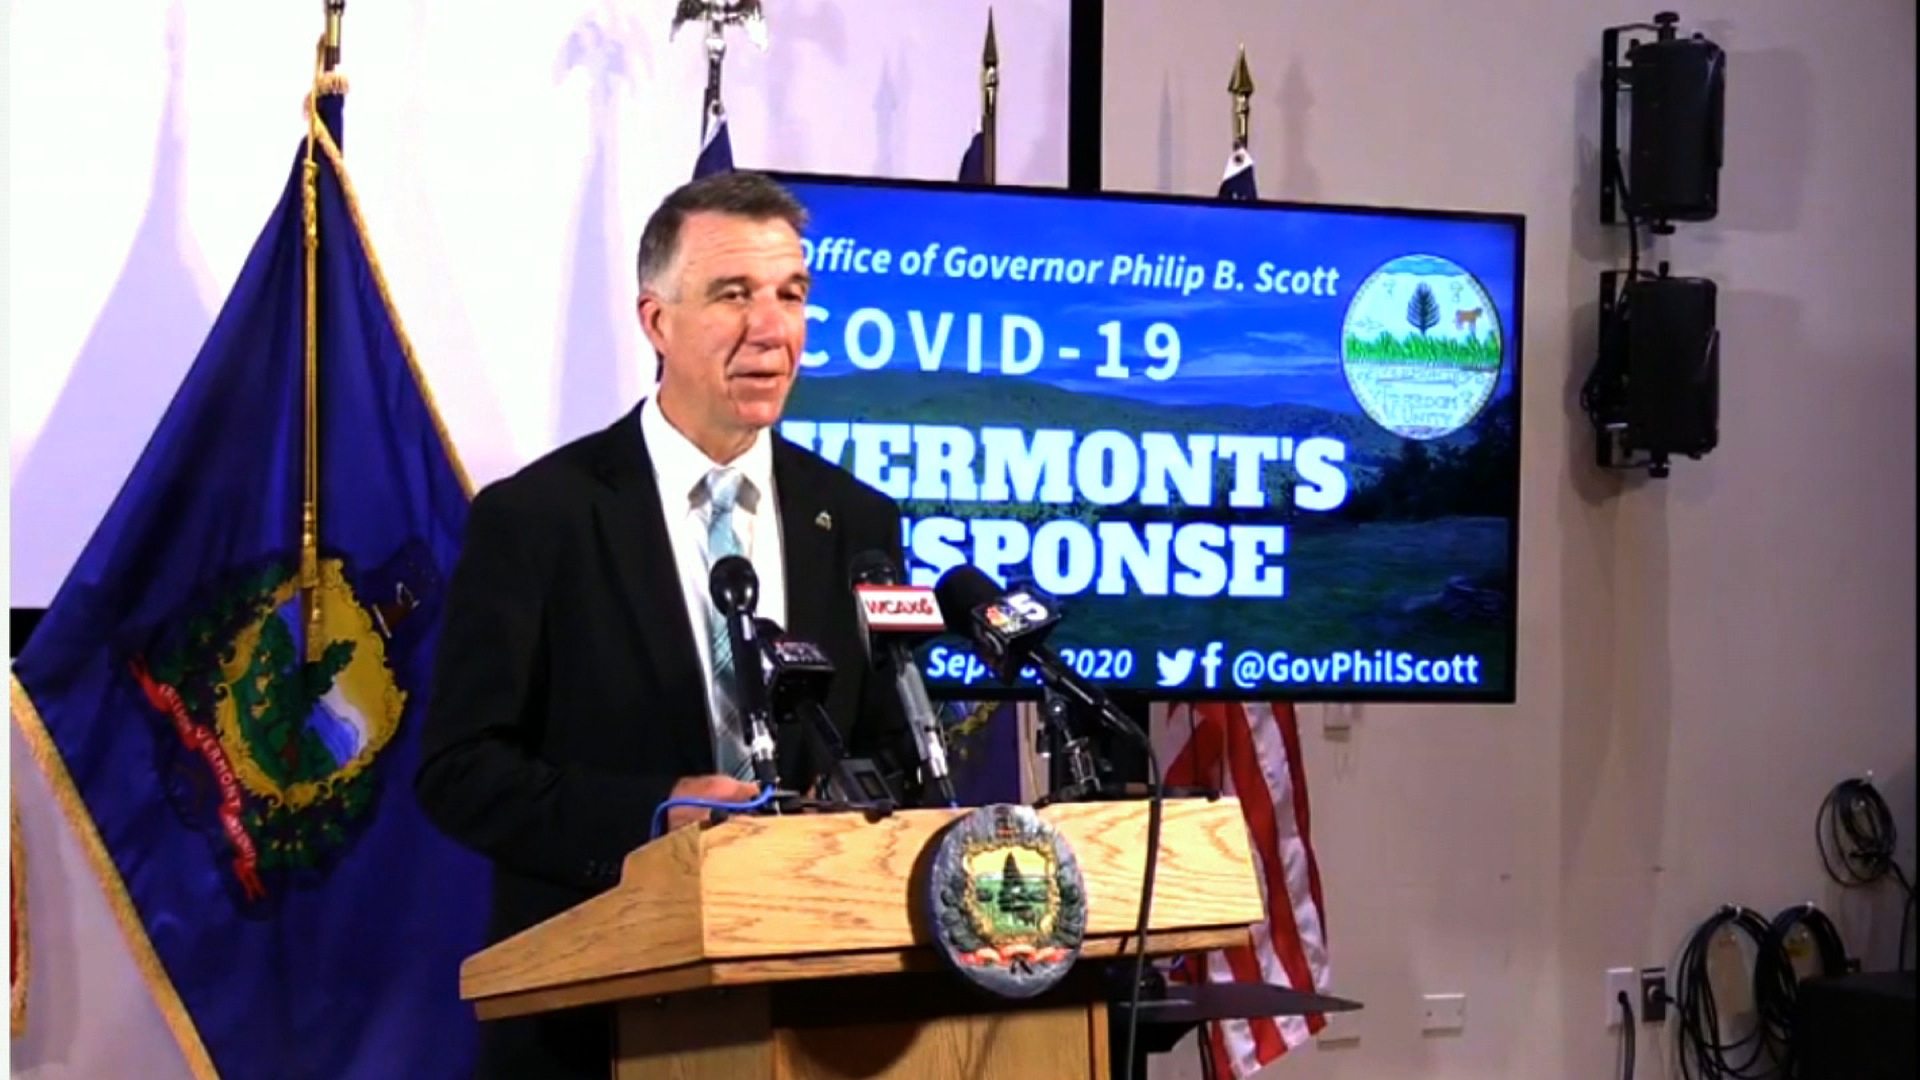 Vermont Gov. Phil Scott speaks during a news conference in Montpelier, Vermont, on September 8.